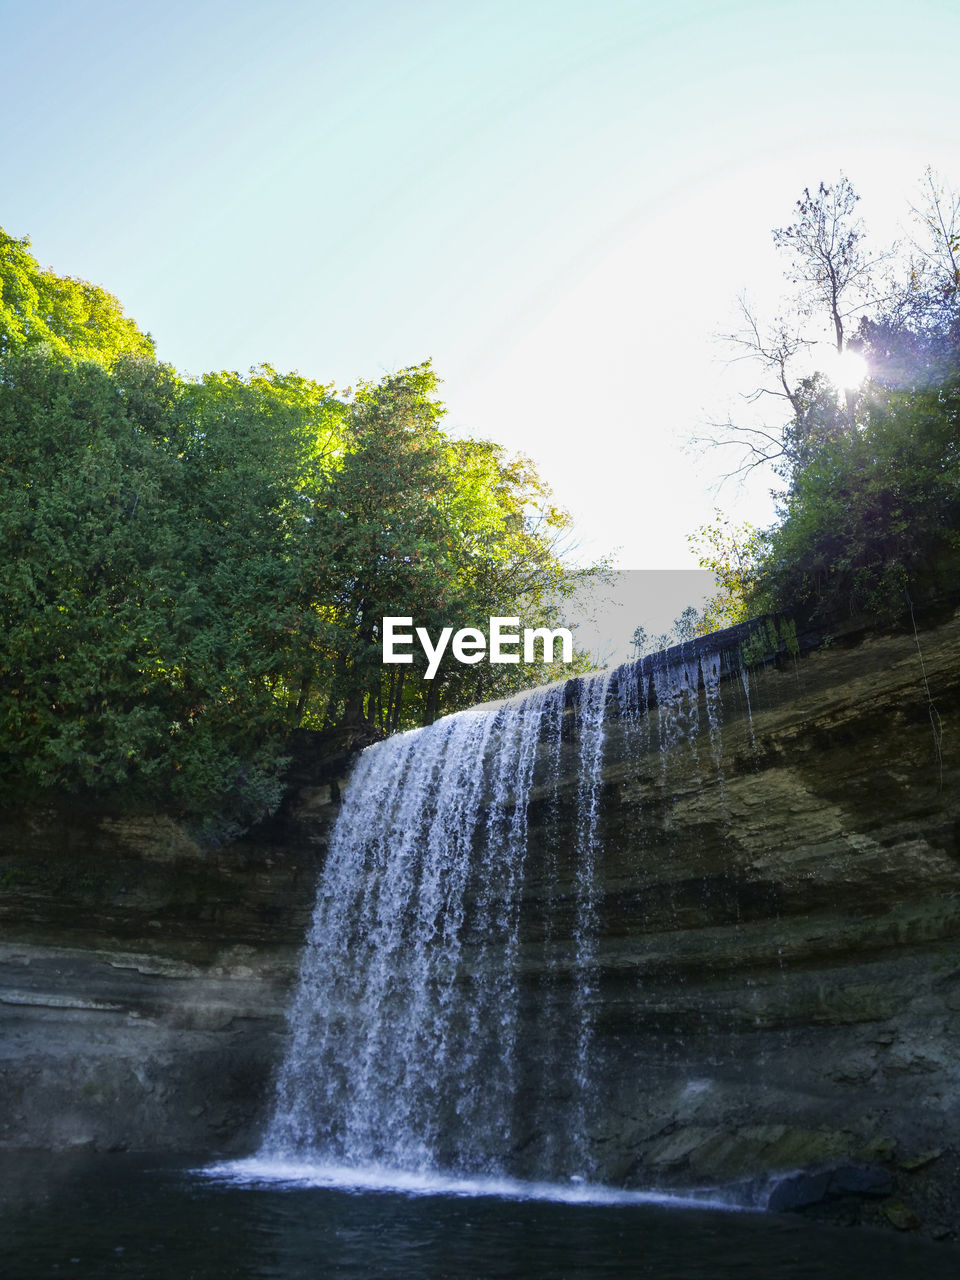 Bridal veil falls on manitoulin island from a low angle.